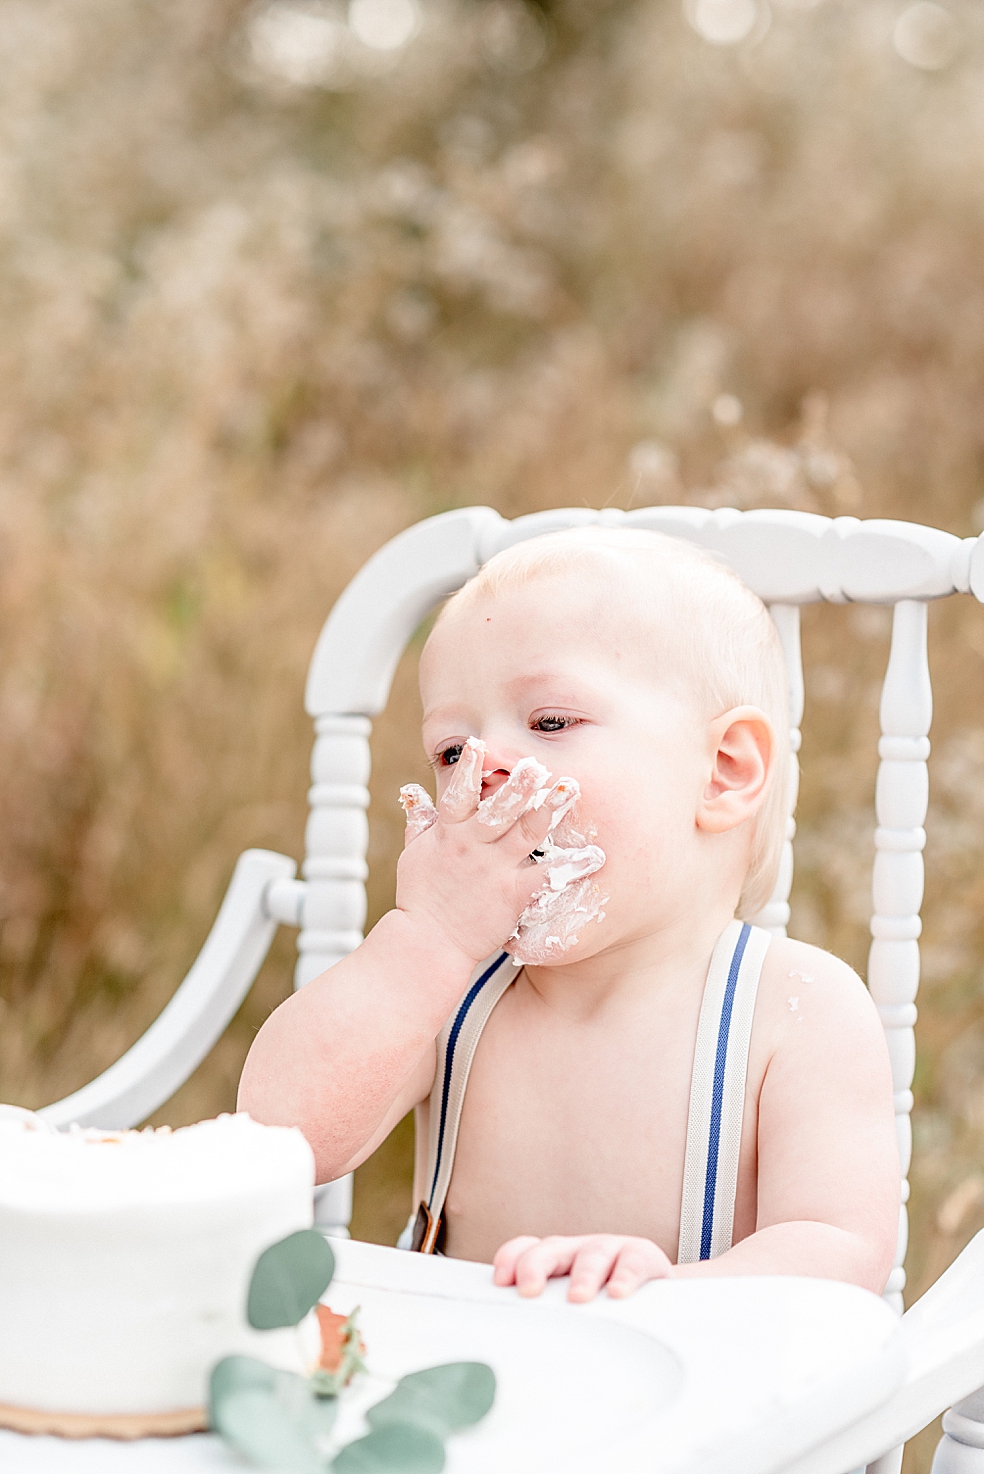 Baby boy eating cake in a white highchair | Photo by Jessica Lee Photography 